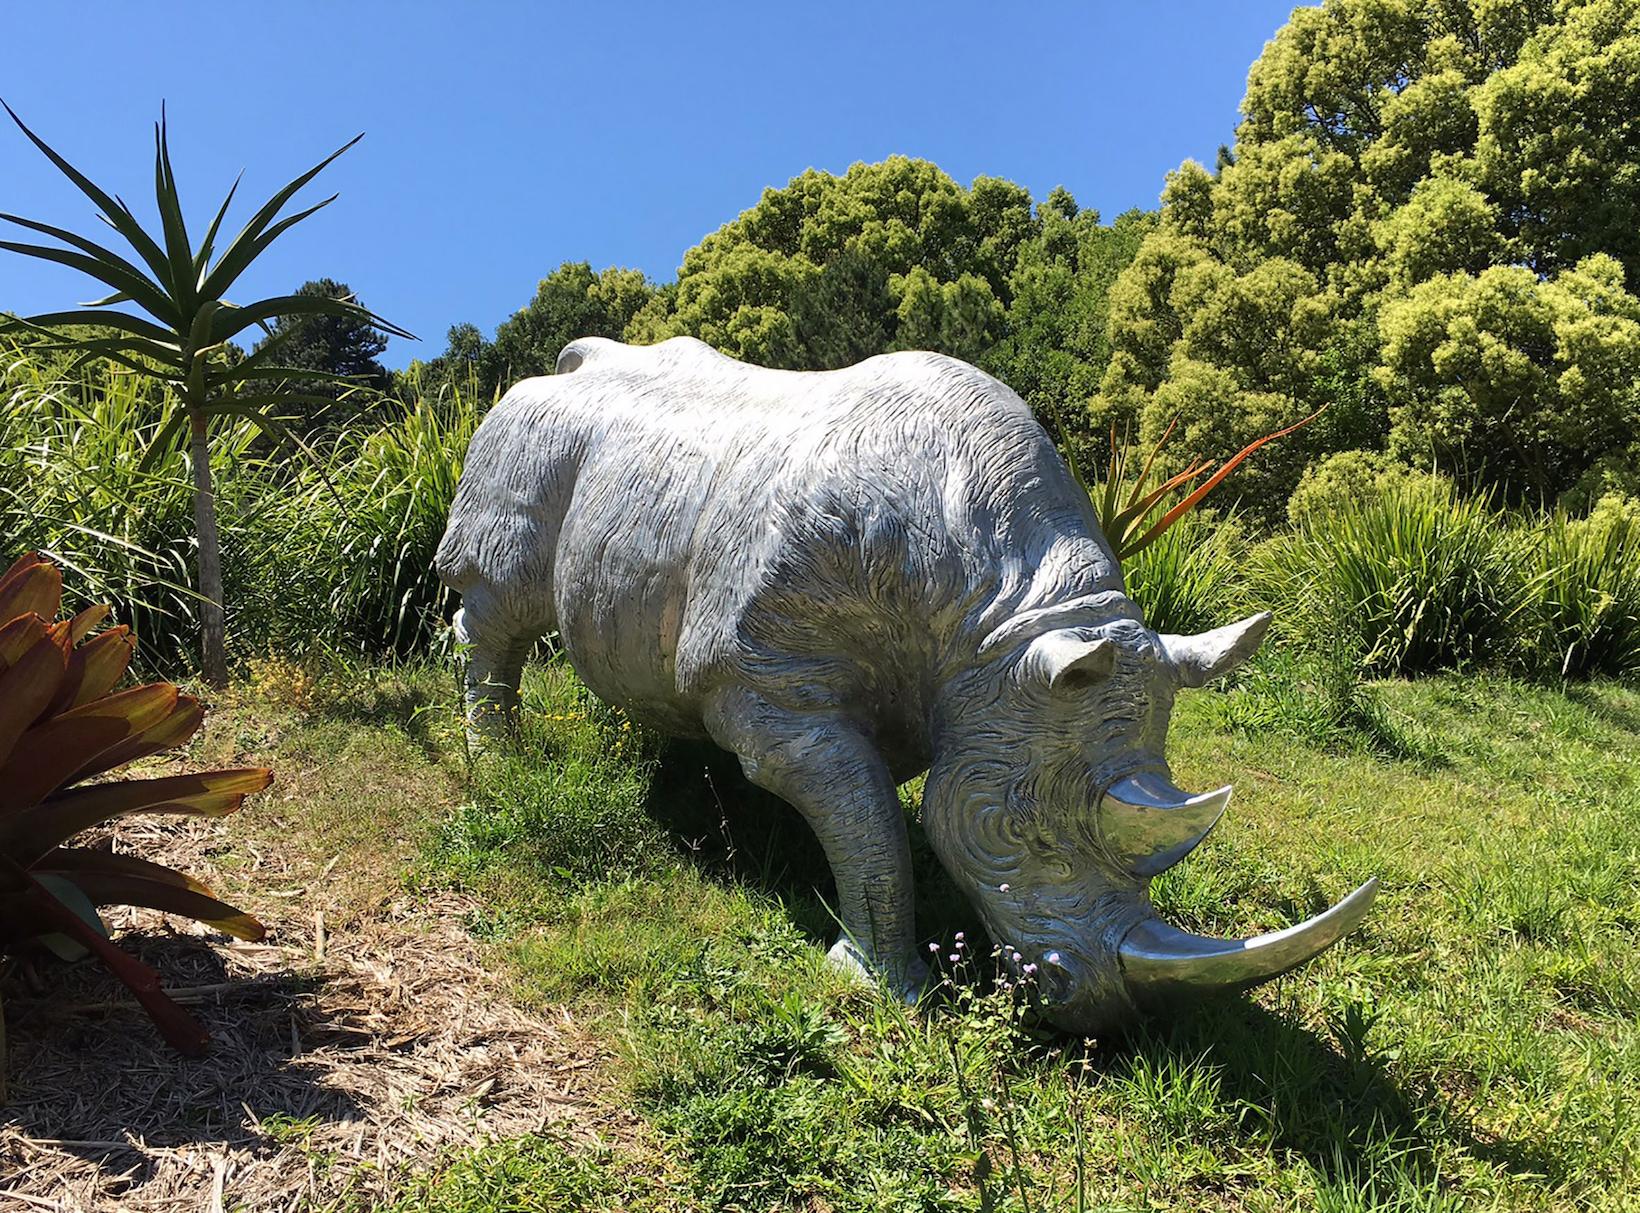 'Rhino a la Charge' Life Size - Contemporary Sculpture by Christian Maas